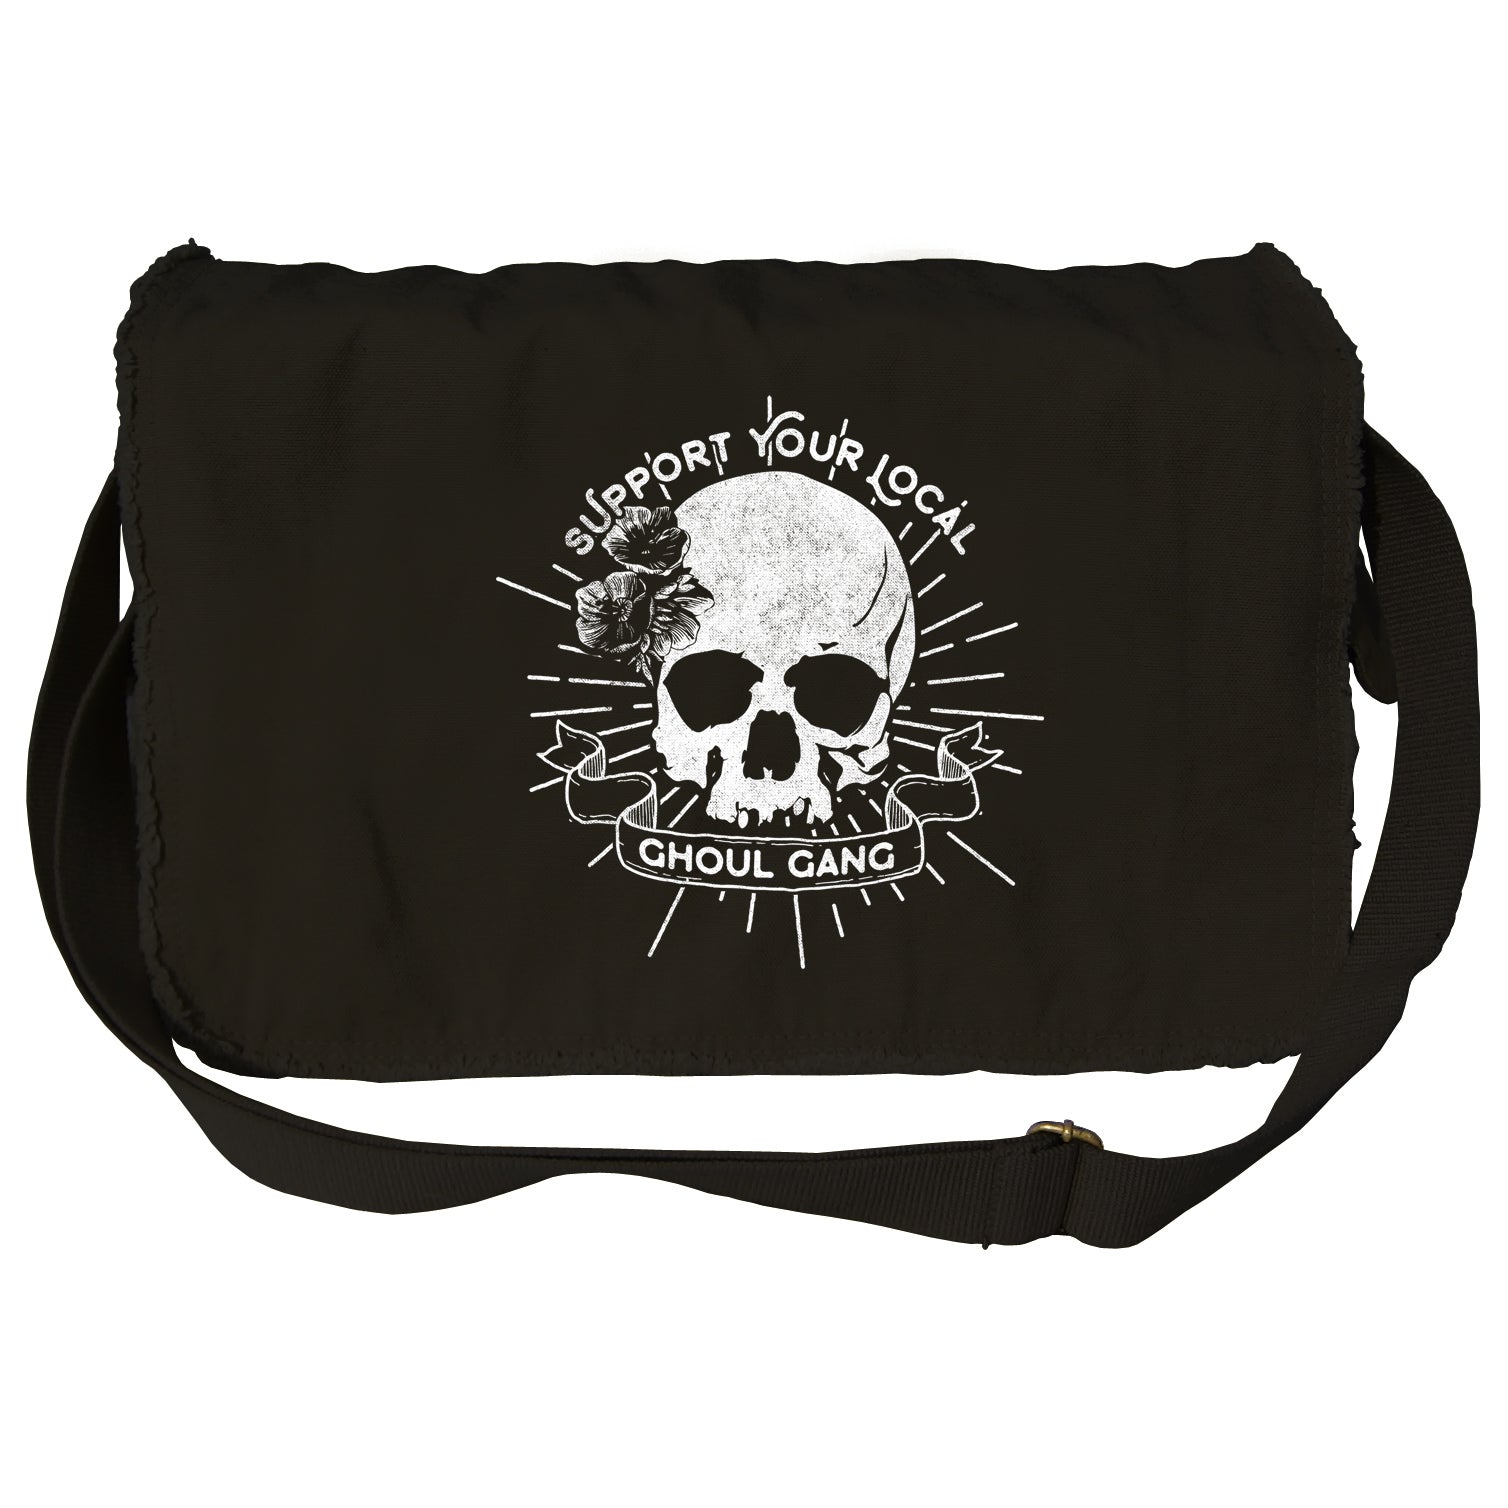 Support Your Local Ghoul Gang Messenger Bag